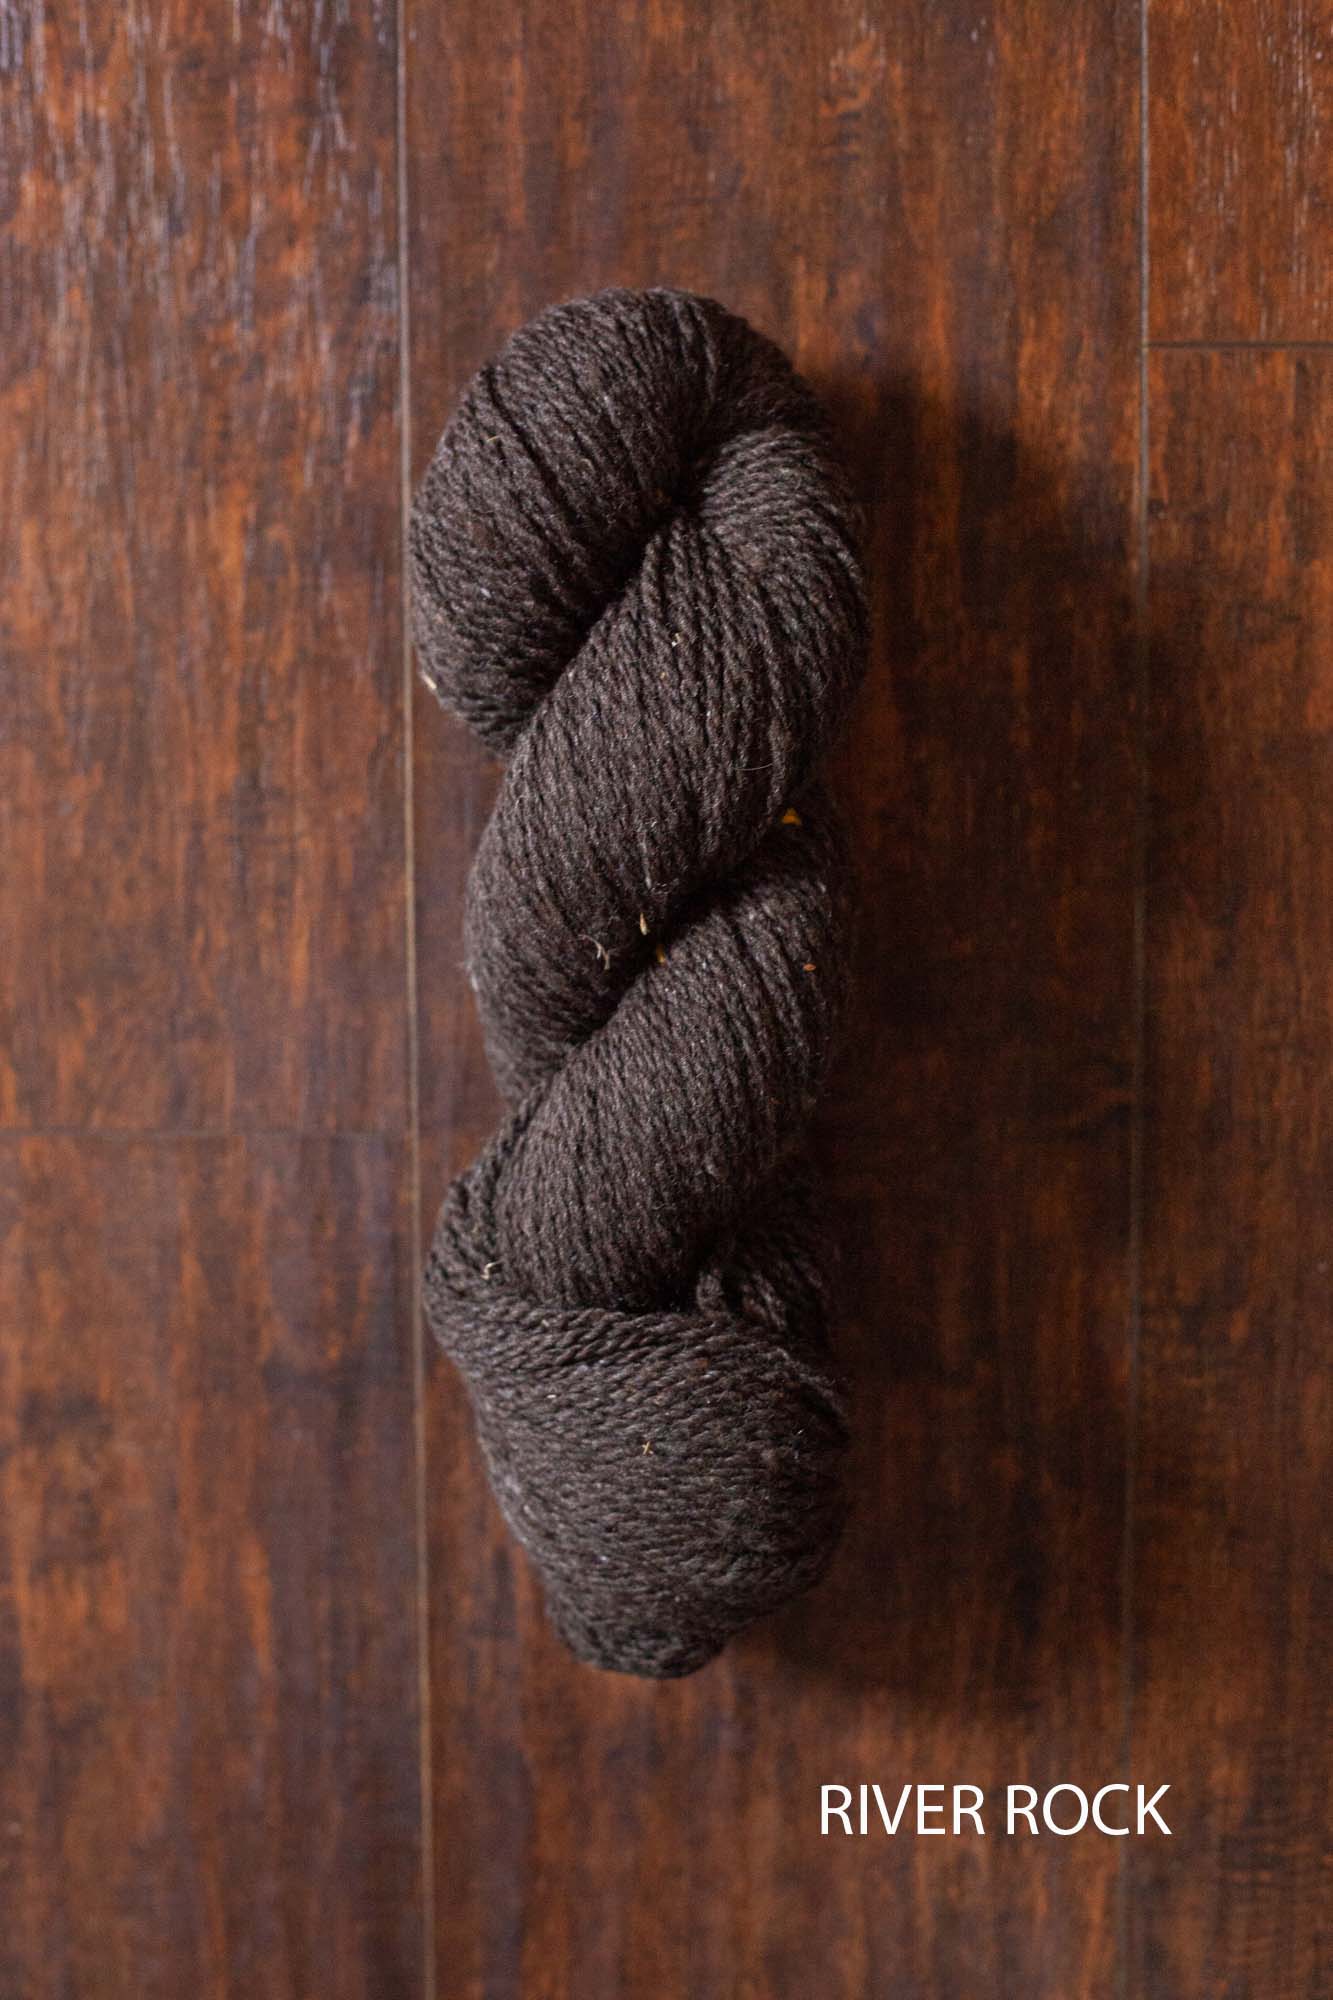 Stone Soup Worsted